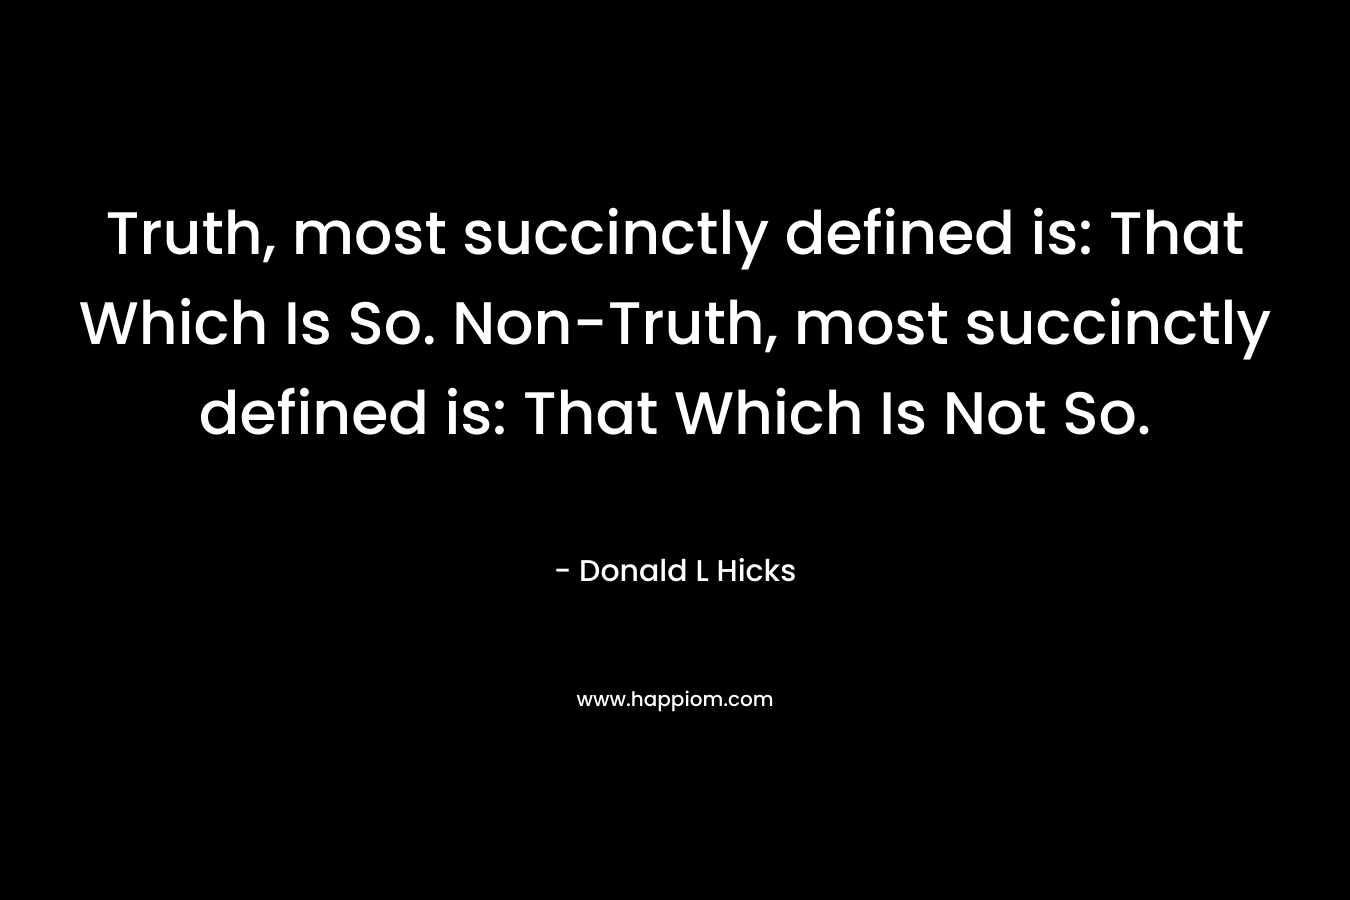 Truth, most succinctly defined is: That Which Is So. Non-Truth, most succinctly defined is: That Which Is Not So.